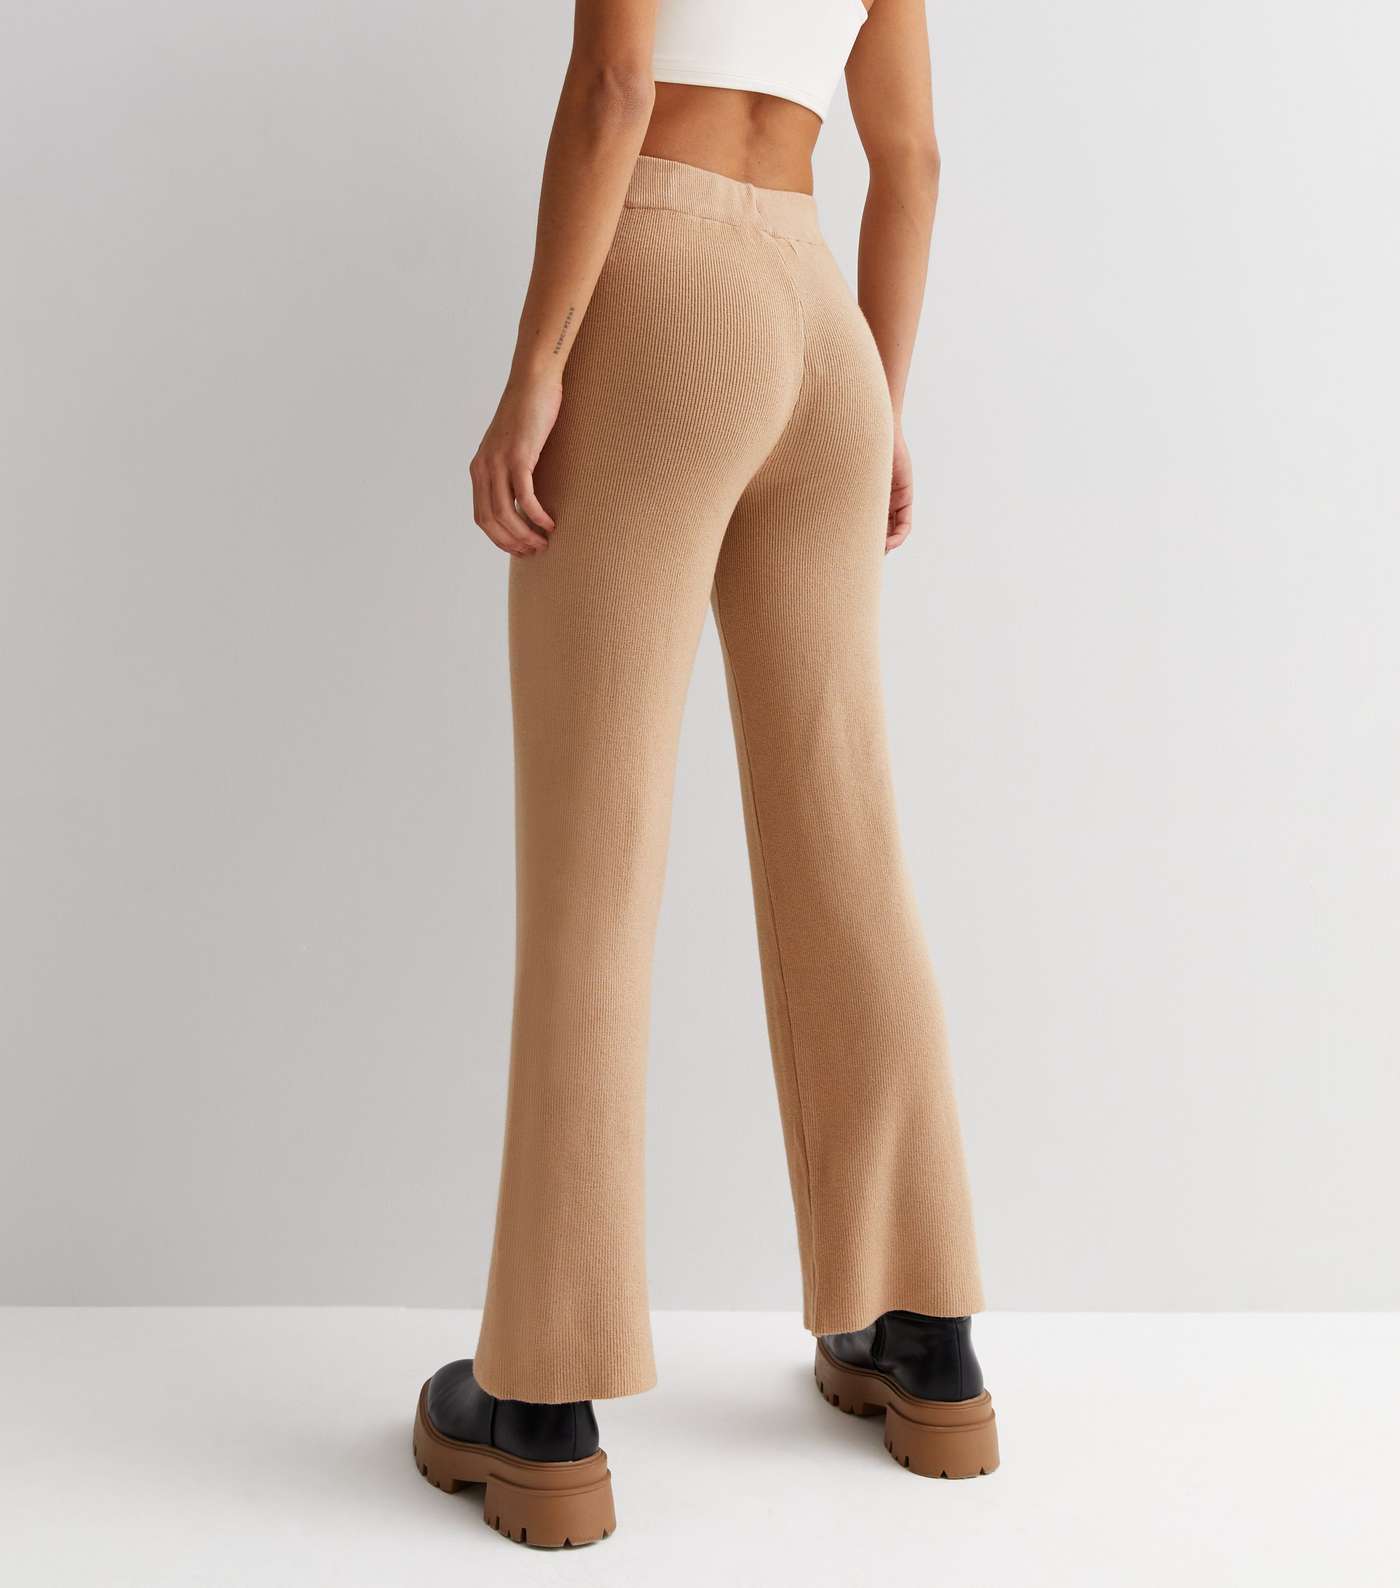 Gini London Light Brown Ribbed Knit High Waist Trousers Image 4